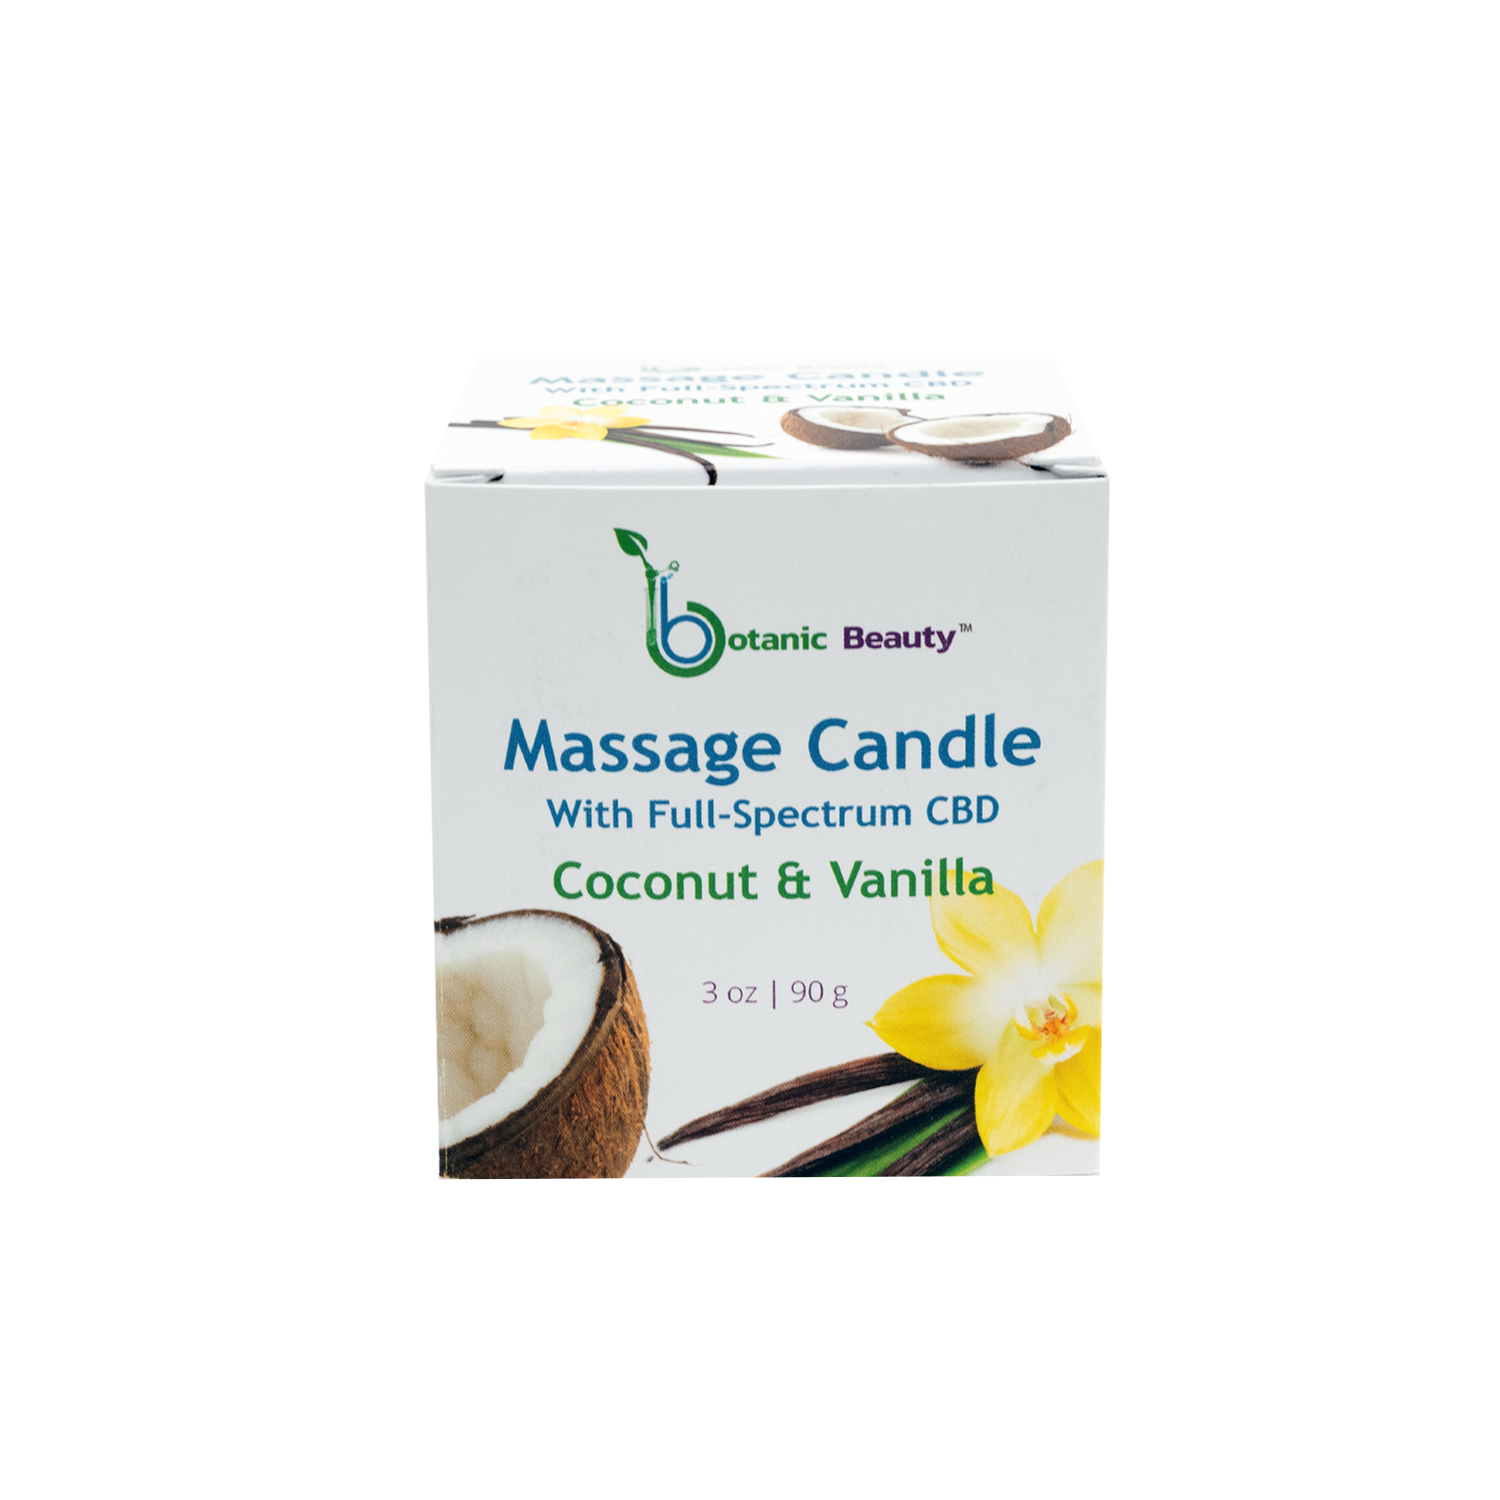 Massage Candle Refill